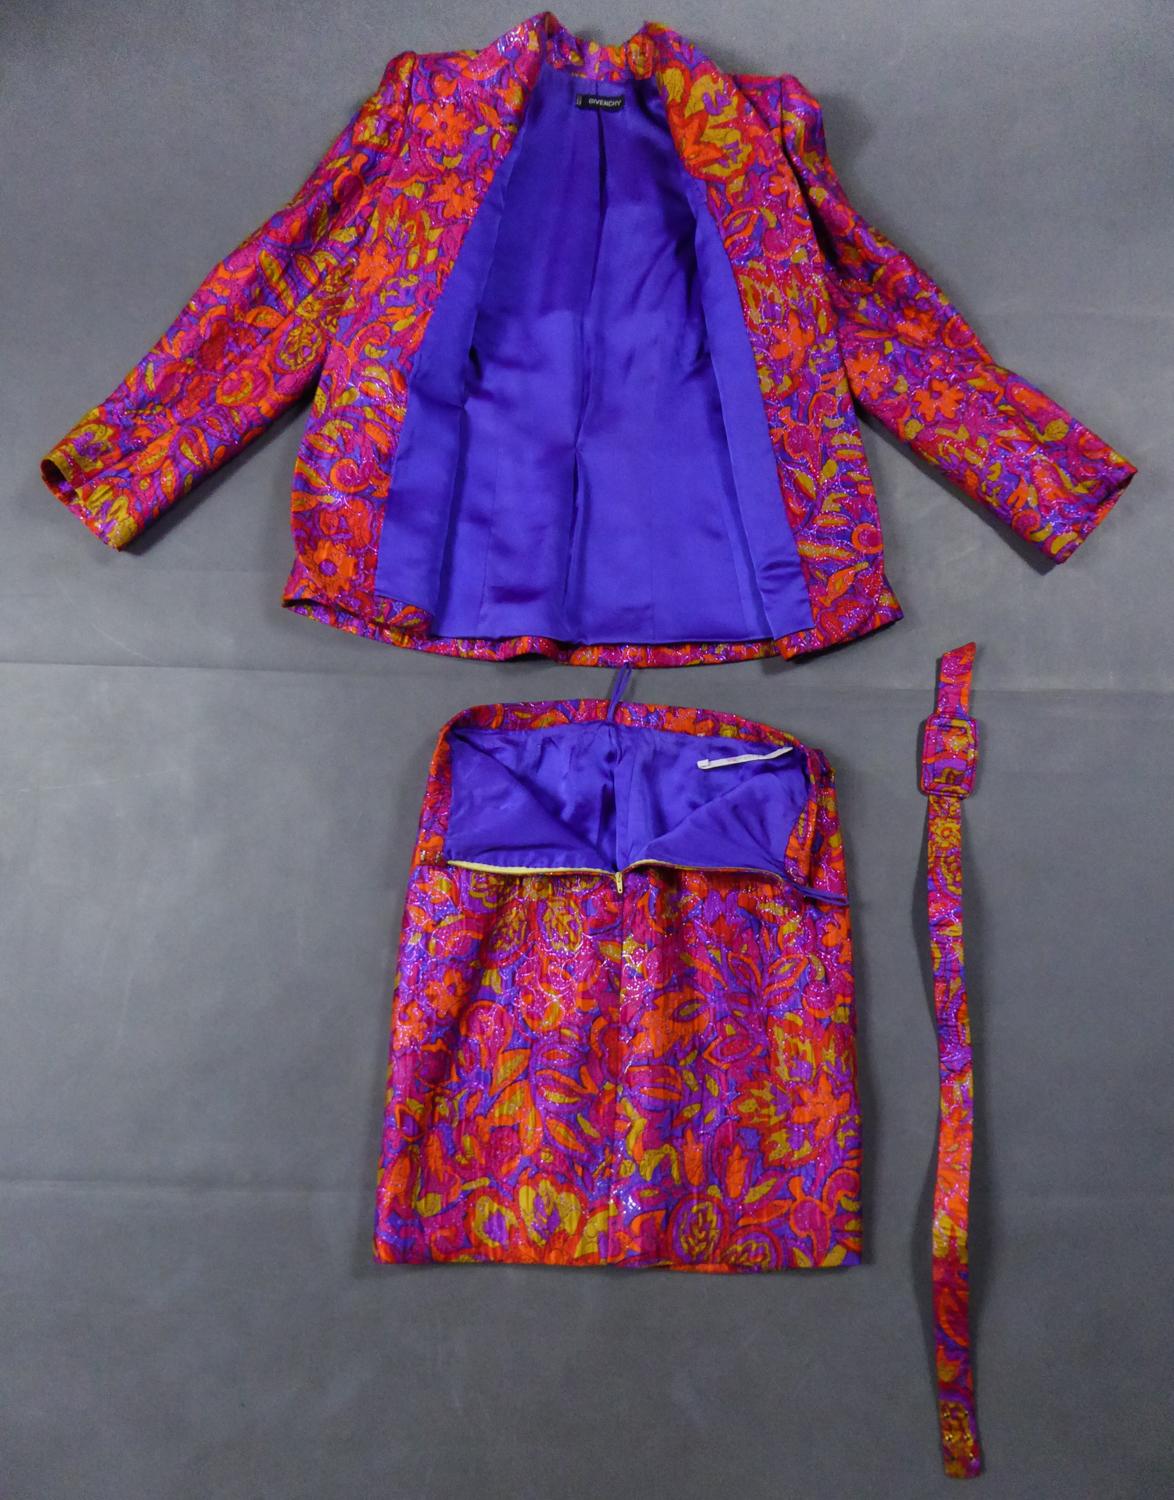 Circa 1982
France

Run way set composed of a jacket, skirt and belt in silk façonné printed and brocaded with silver threads by Mister Hubert de Givenchy at the beginning of the 1980s. Quilted appearance by the brocading of the silk with psychedelic